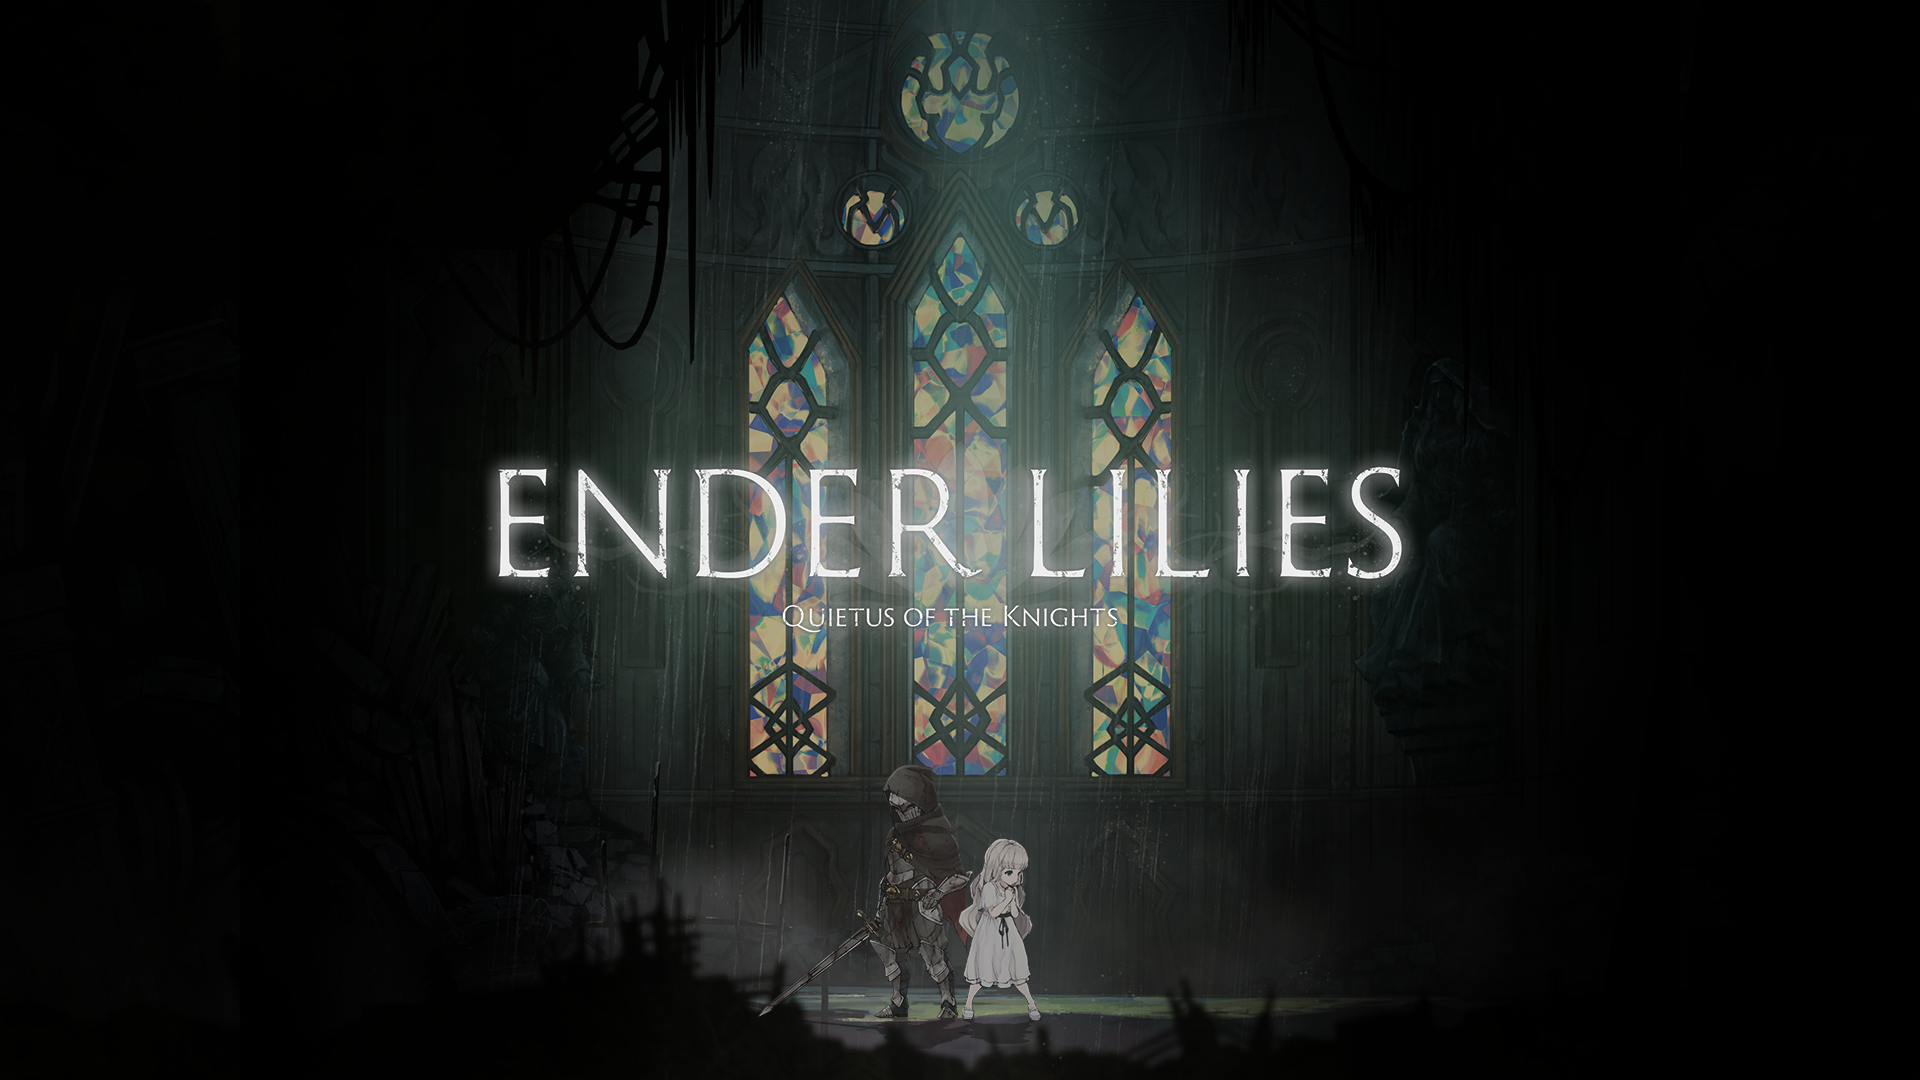 Ender Lilies: Quietus of the Knights Takes Dark Fantasy to the Next Level